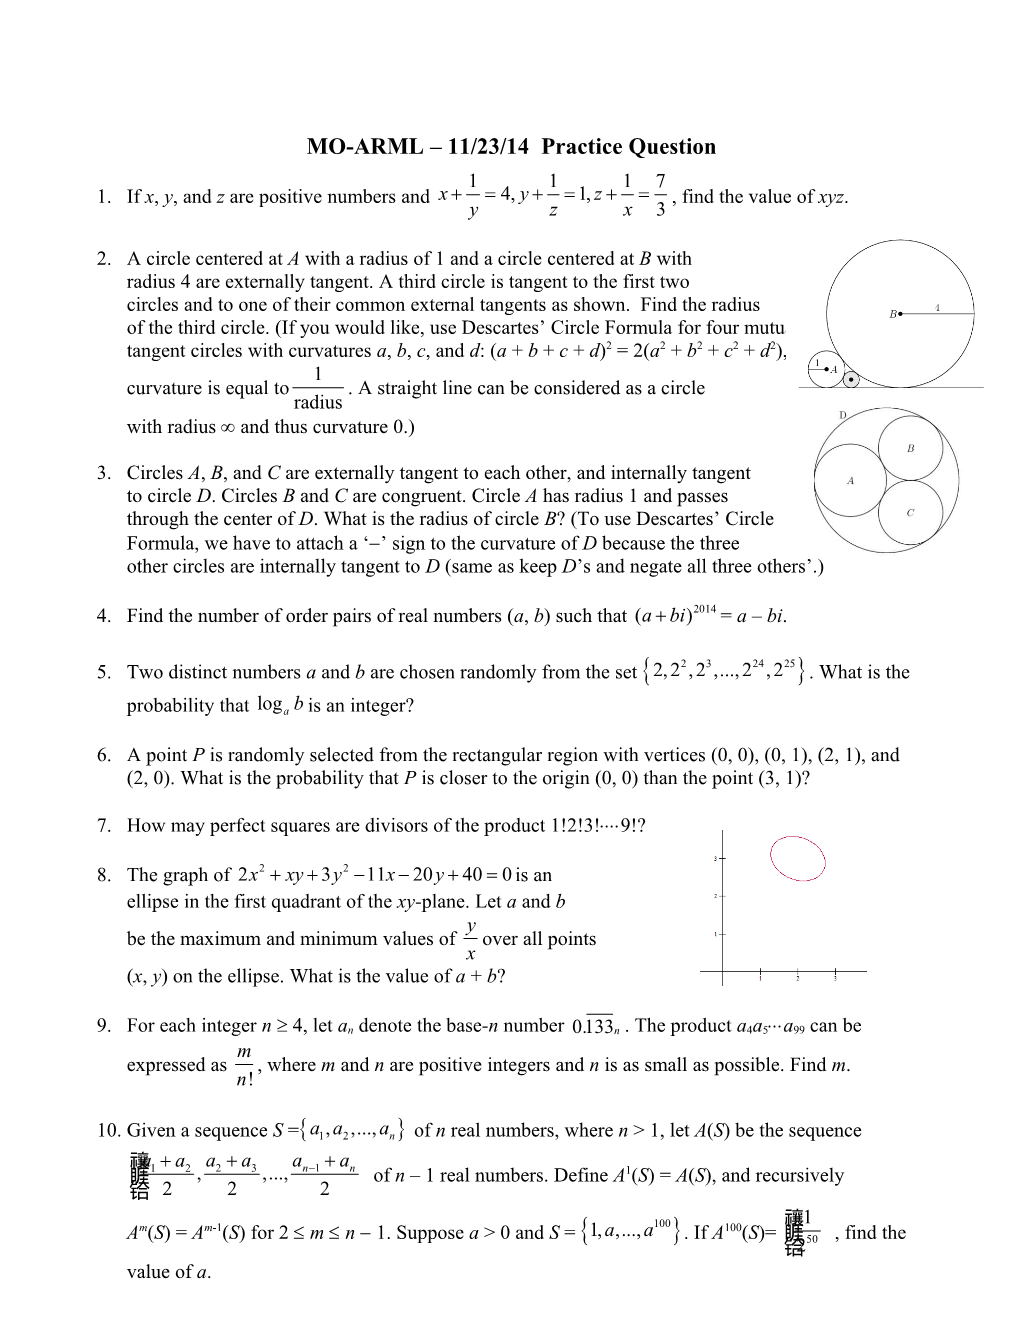 MO-ARML 11/23/14 Practice Question